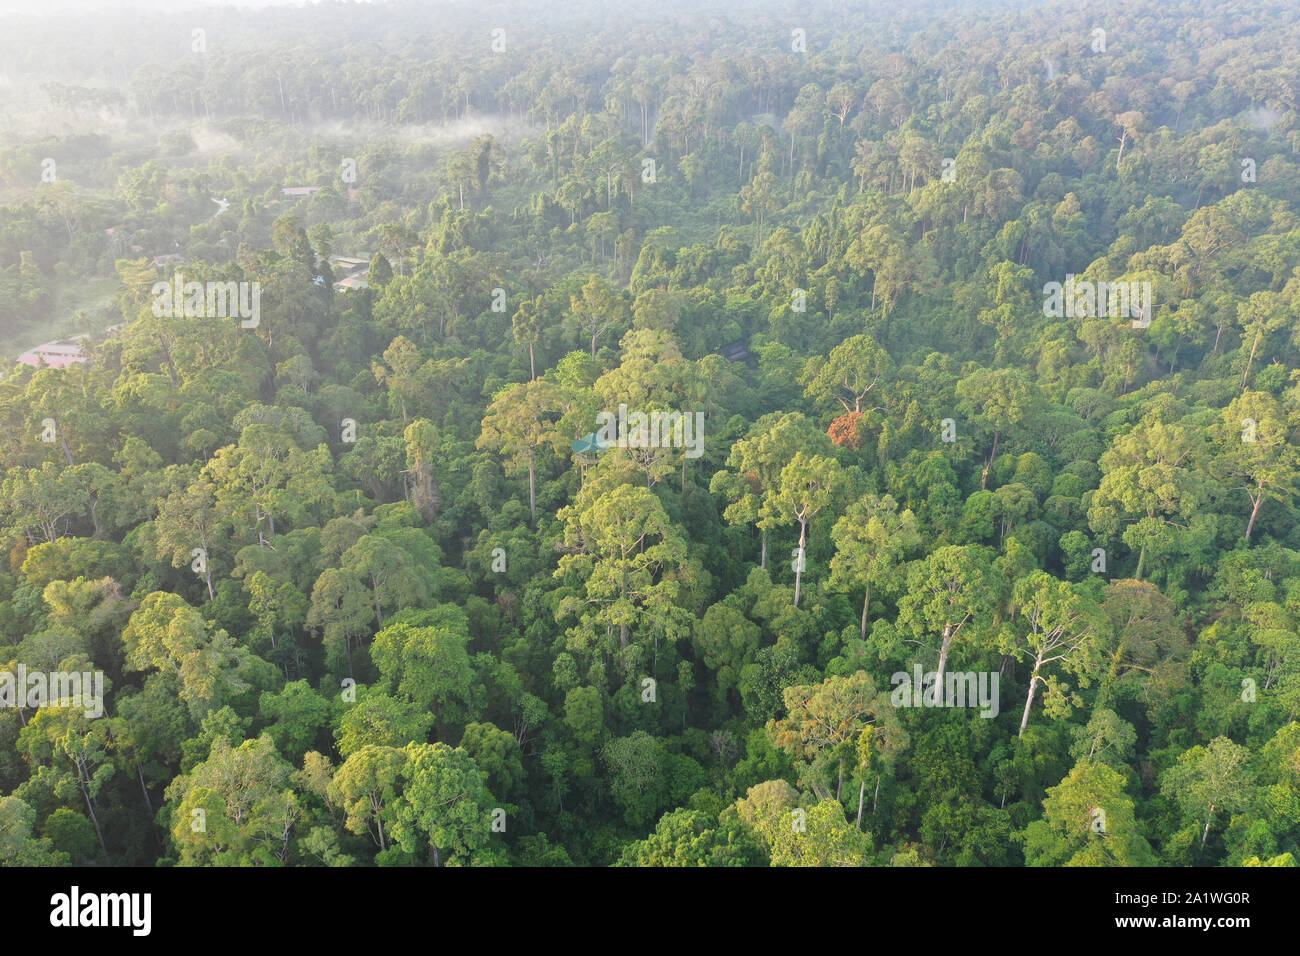 Aerial view of Borneo Rainforest of Rain Forest. Stock Photo